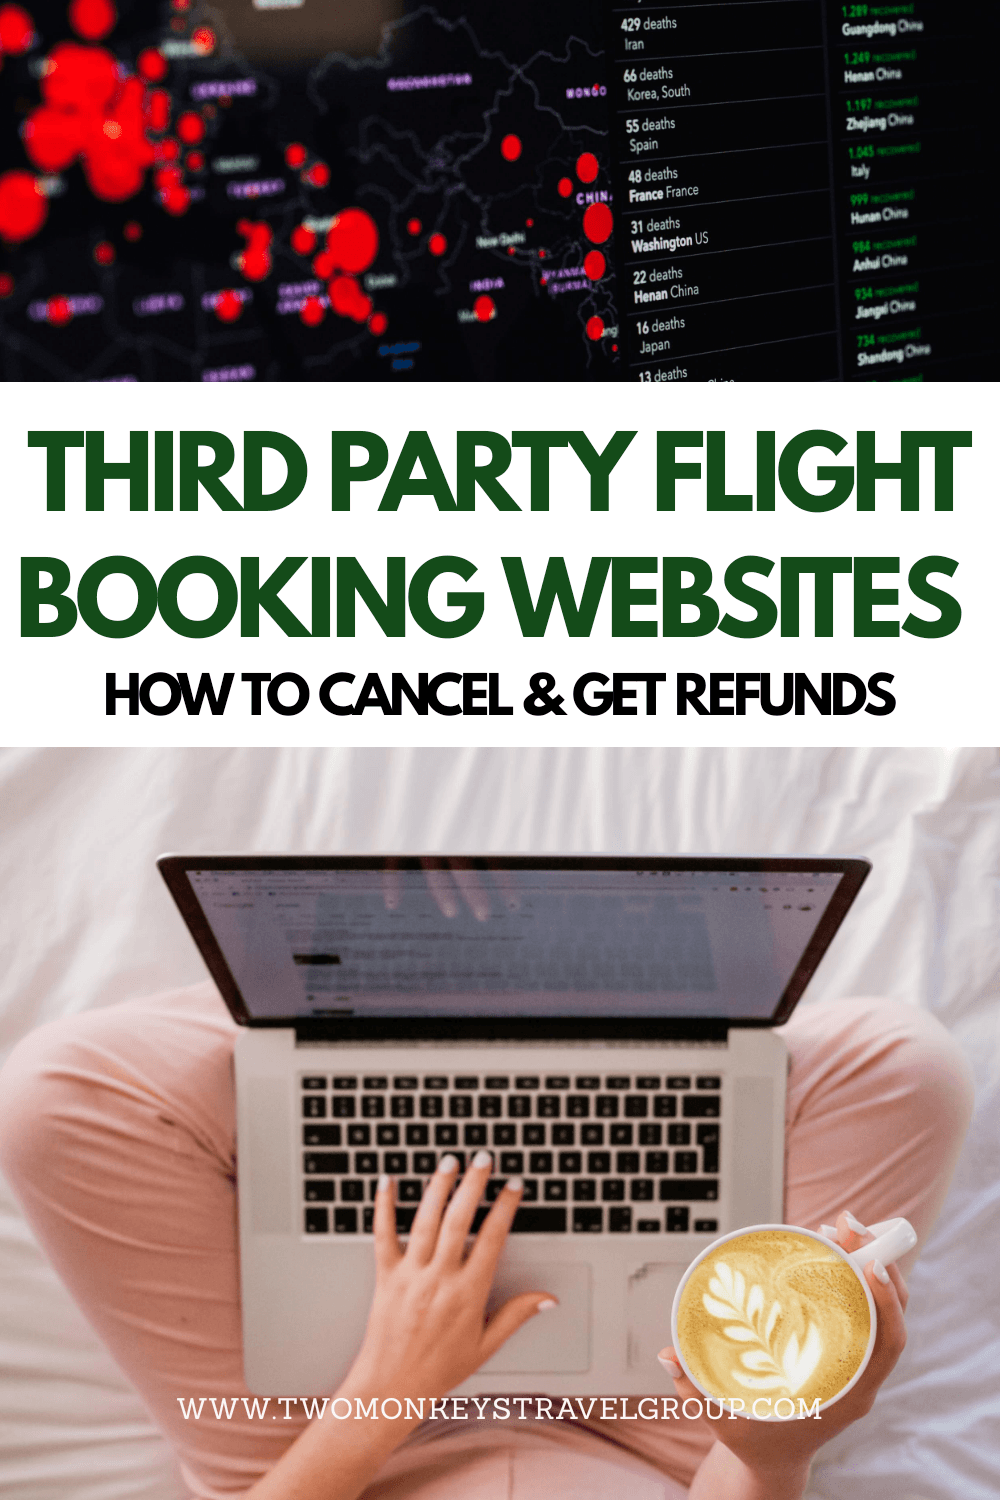 How to Cancel Flights and Get Refunds on Third Party Flight Booking Websites